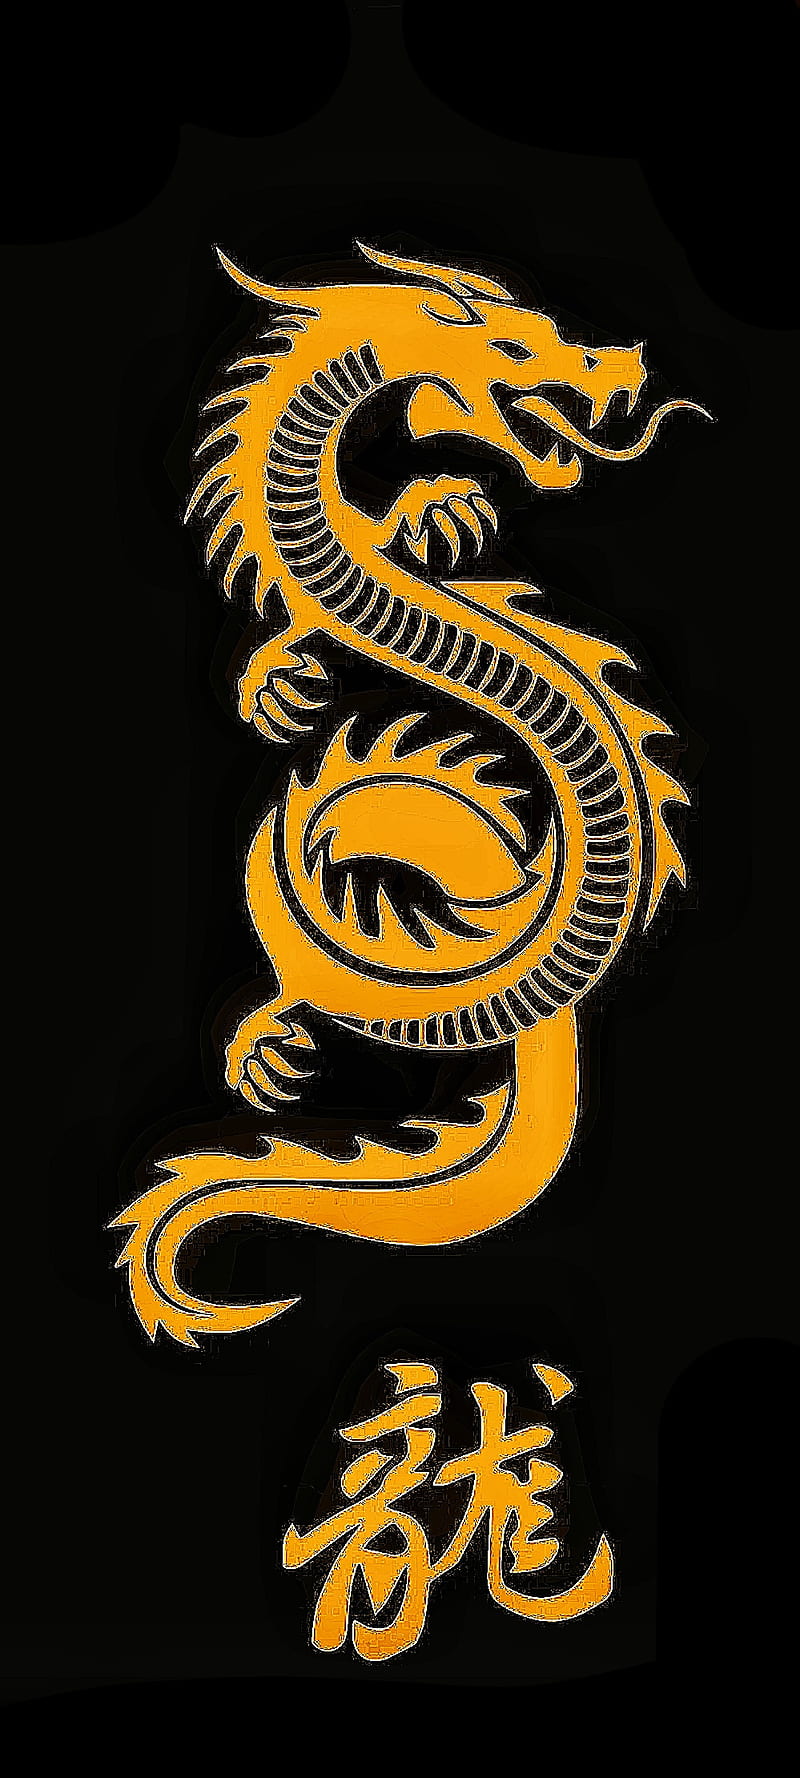 Discover more than 52 golden dragon wallpaper latest - in.cdgdbentre